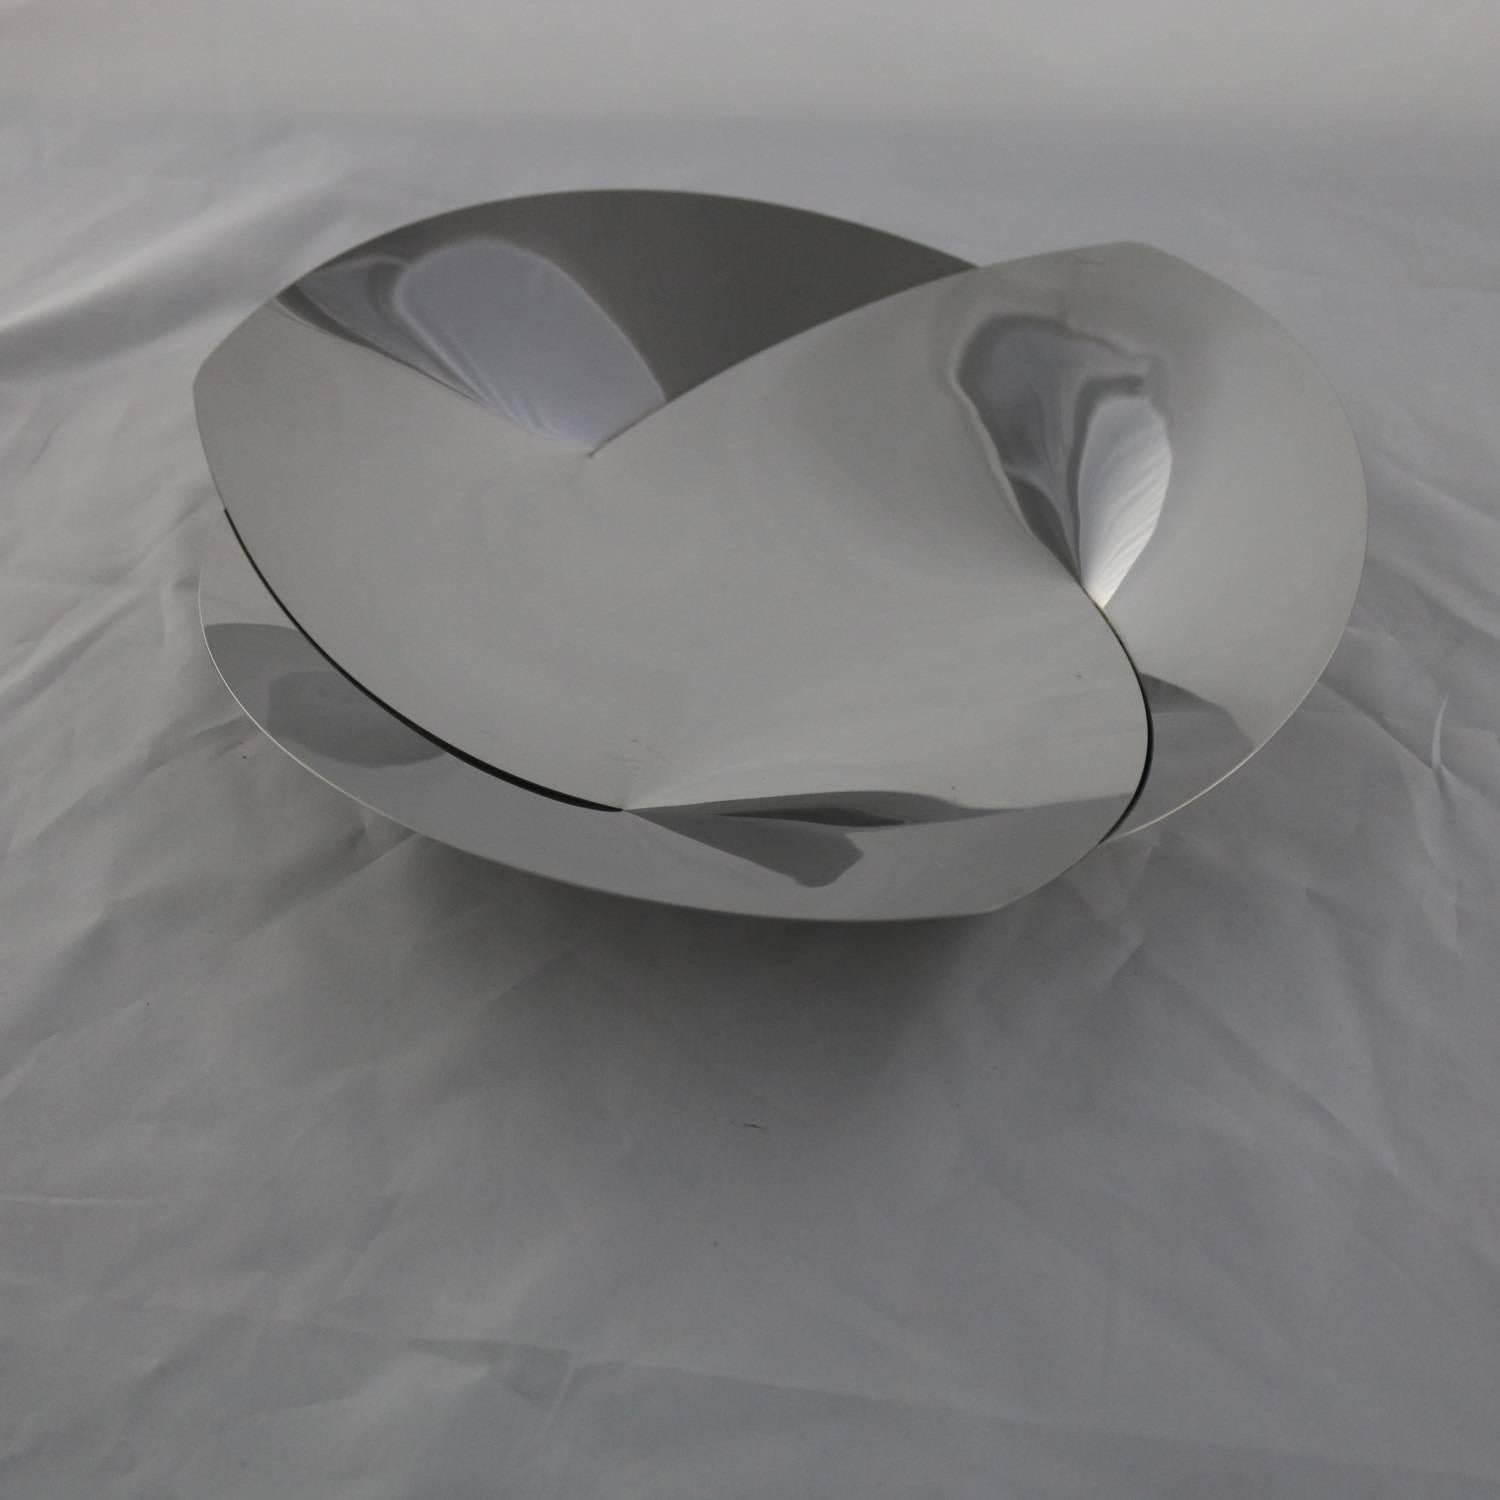 Beautiful polished stainless-steel fruit bowl, the ABI01 Resonance, designed in 2006 by Alice Abi for Alessi. This one is in terrific condition even though it has been used, circa 2006

This fruit bowl is simply gorgeous! It was designed by Alice